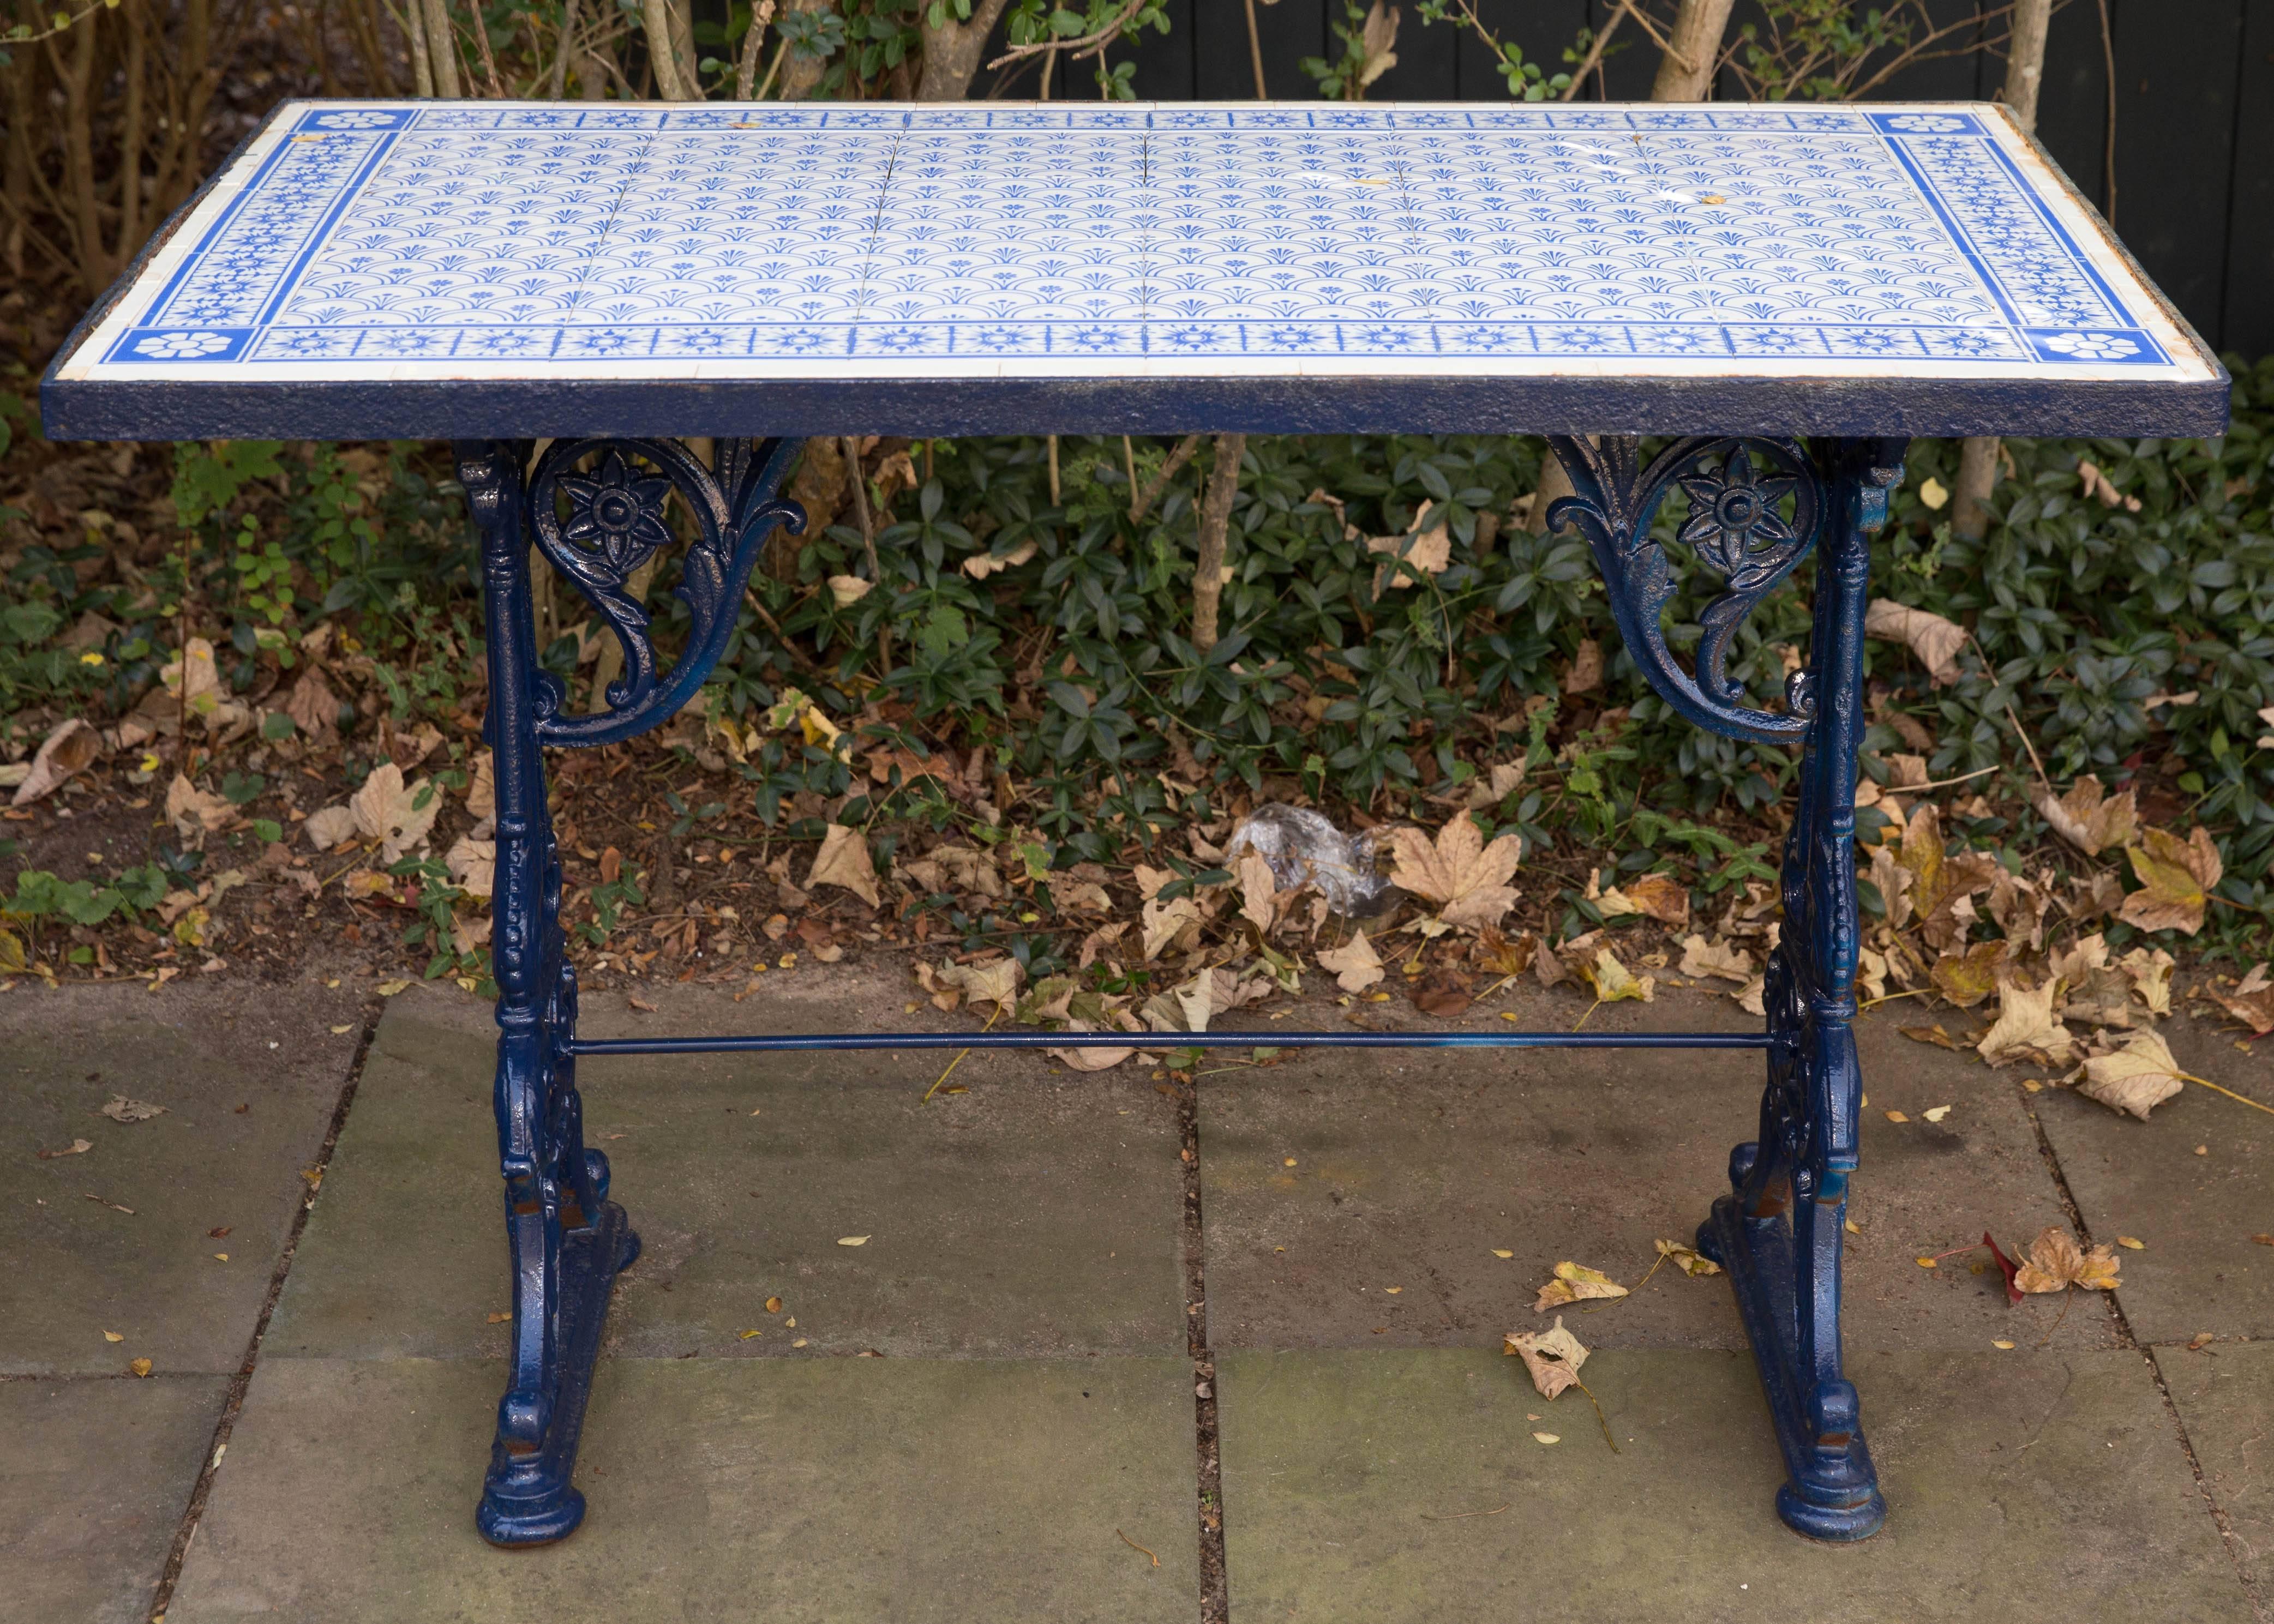 Aesthetic Movement Pair of Iron Pub Table Consoles with Blue and White Tile Tops / Aesthetic Style